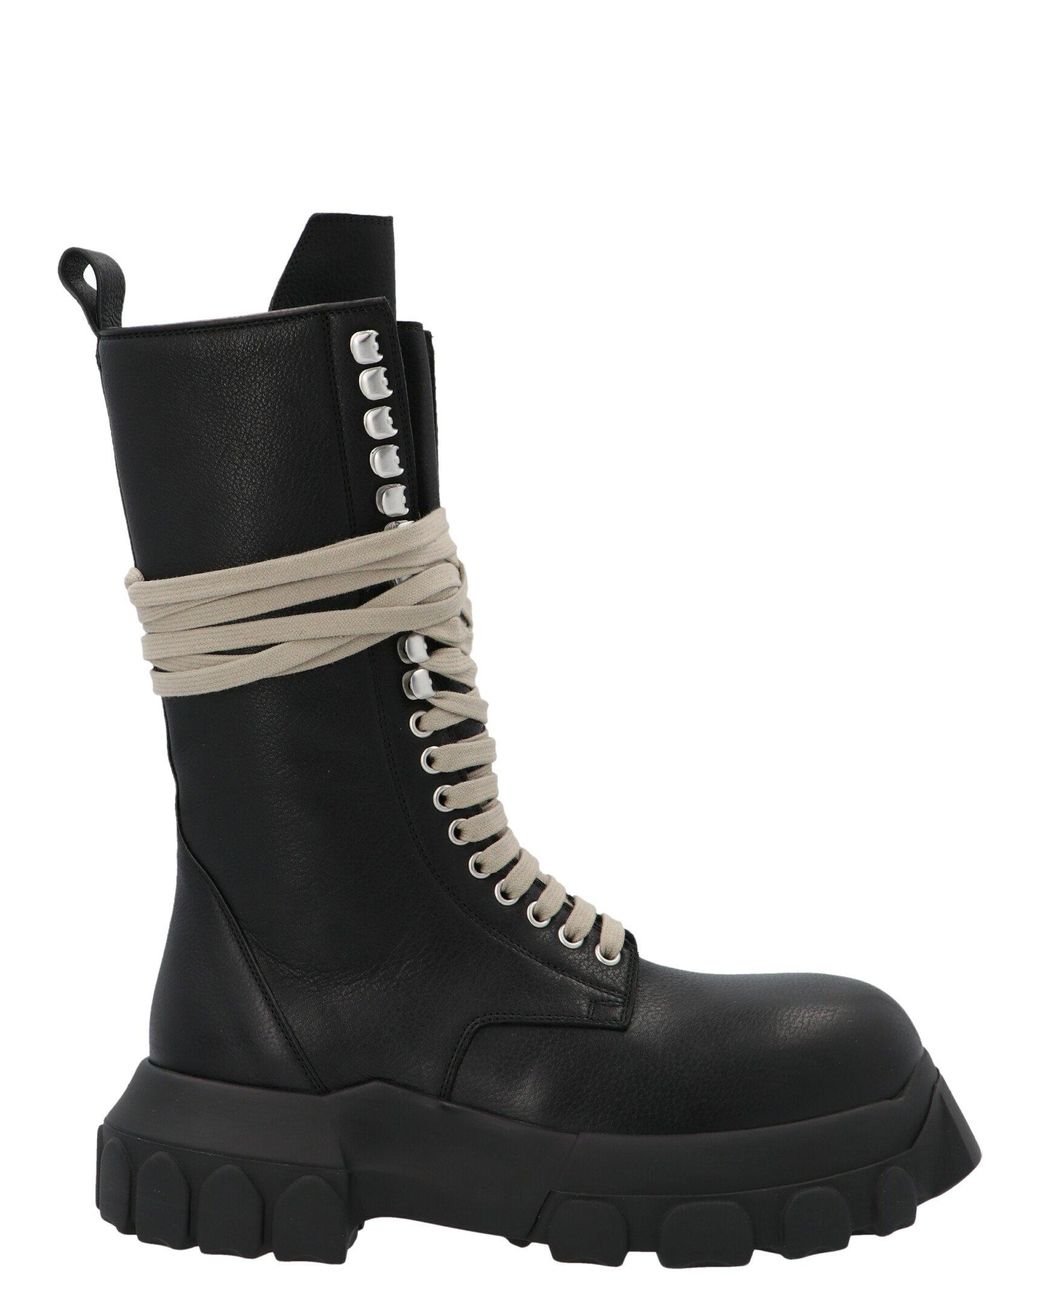 Rick Owens Leather Phlegethon Lace-up Bozo Tractor Boots in Black - Lyst